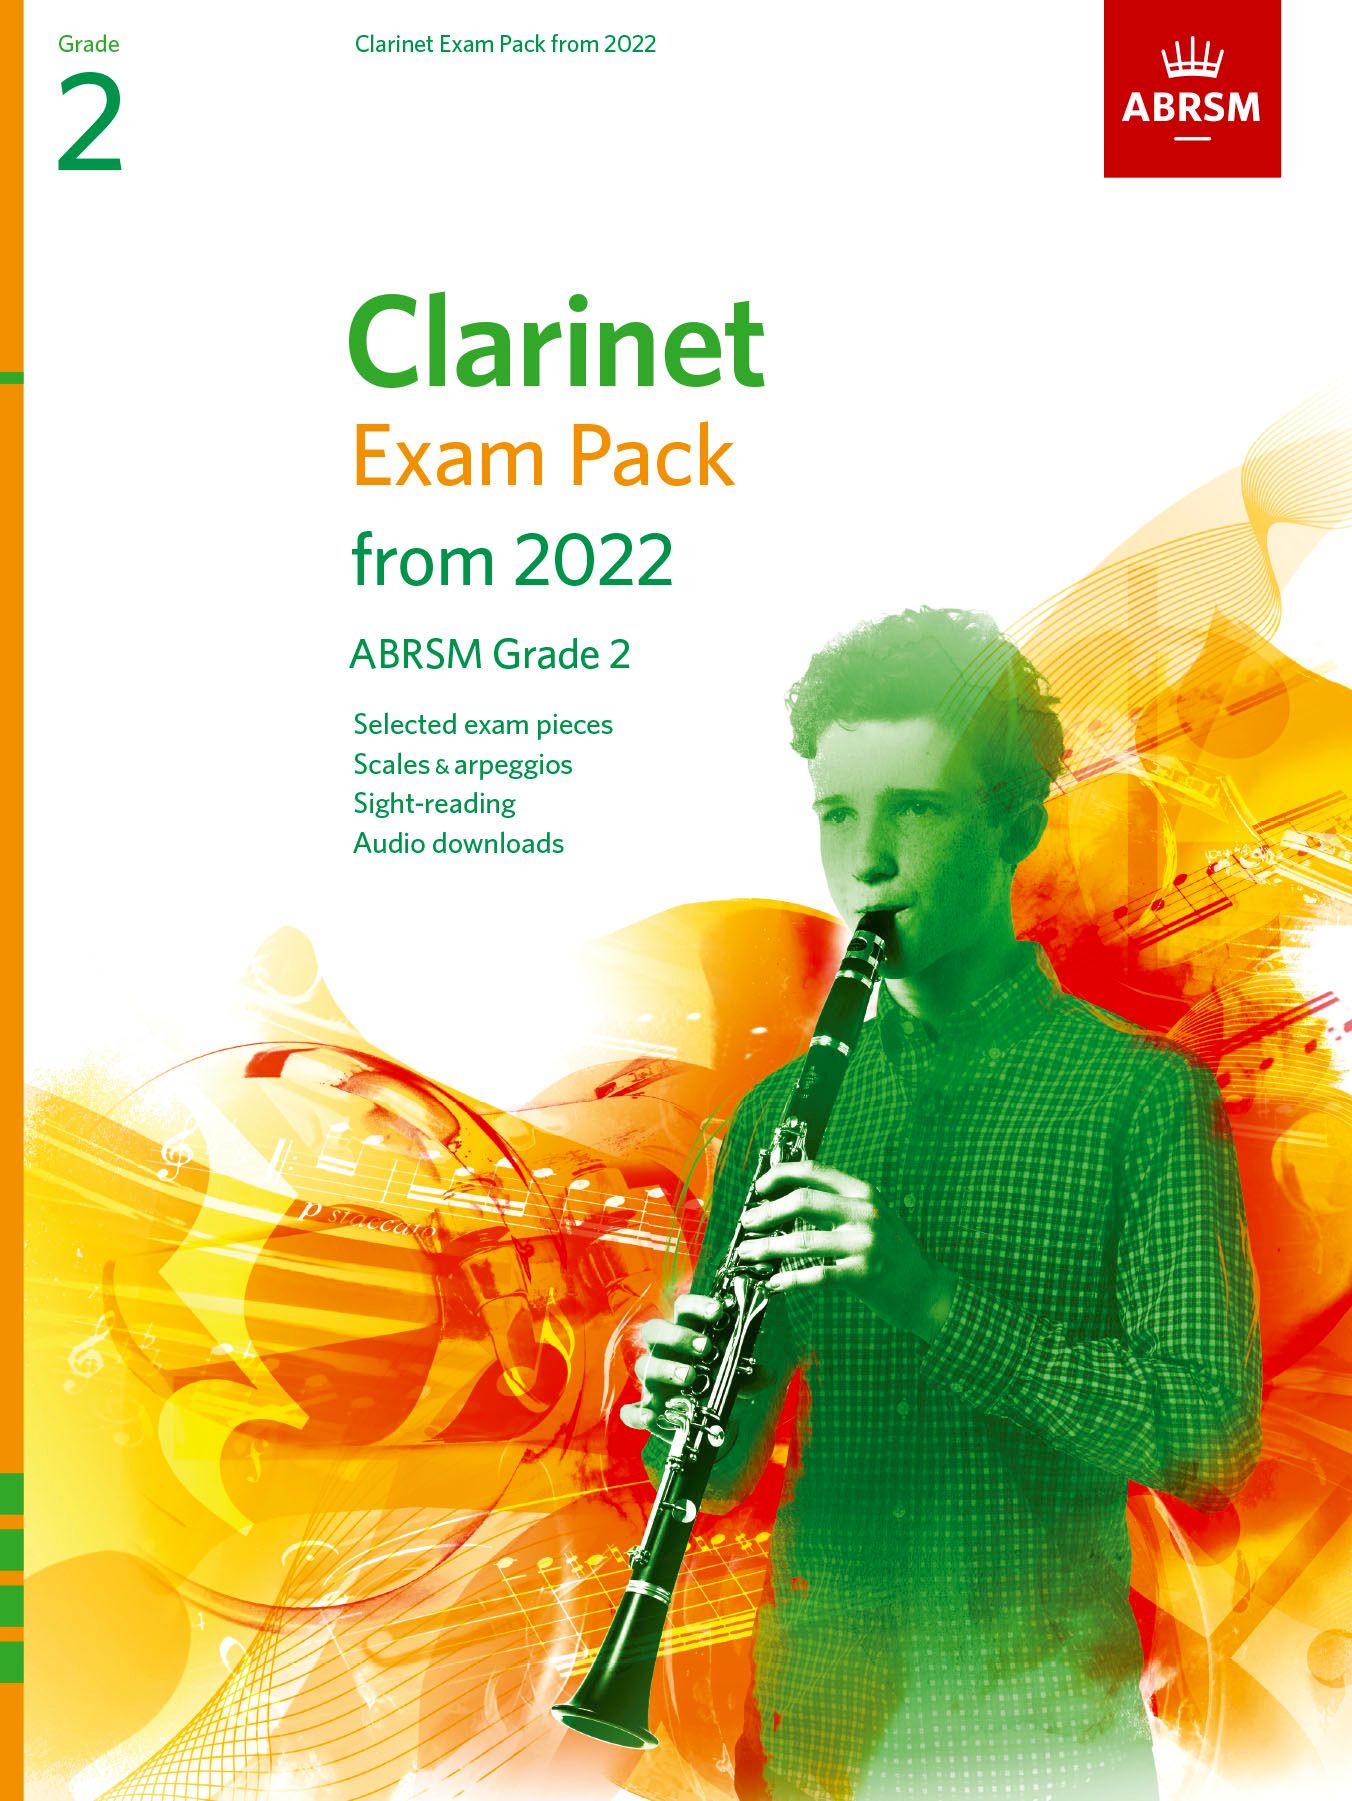 Clarinet Exam Pack from 2022, ABRSM Grade 2